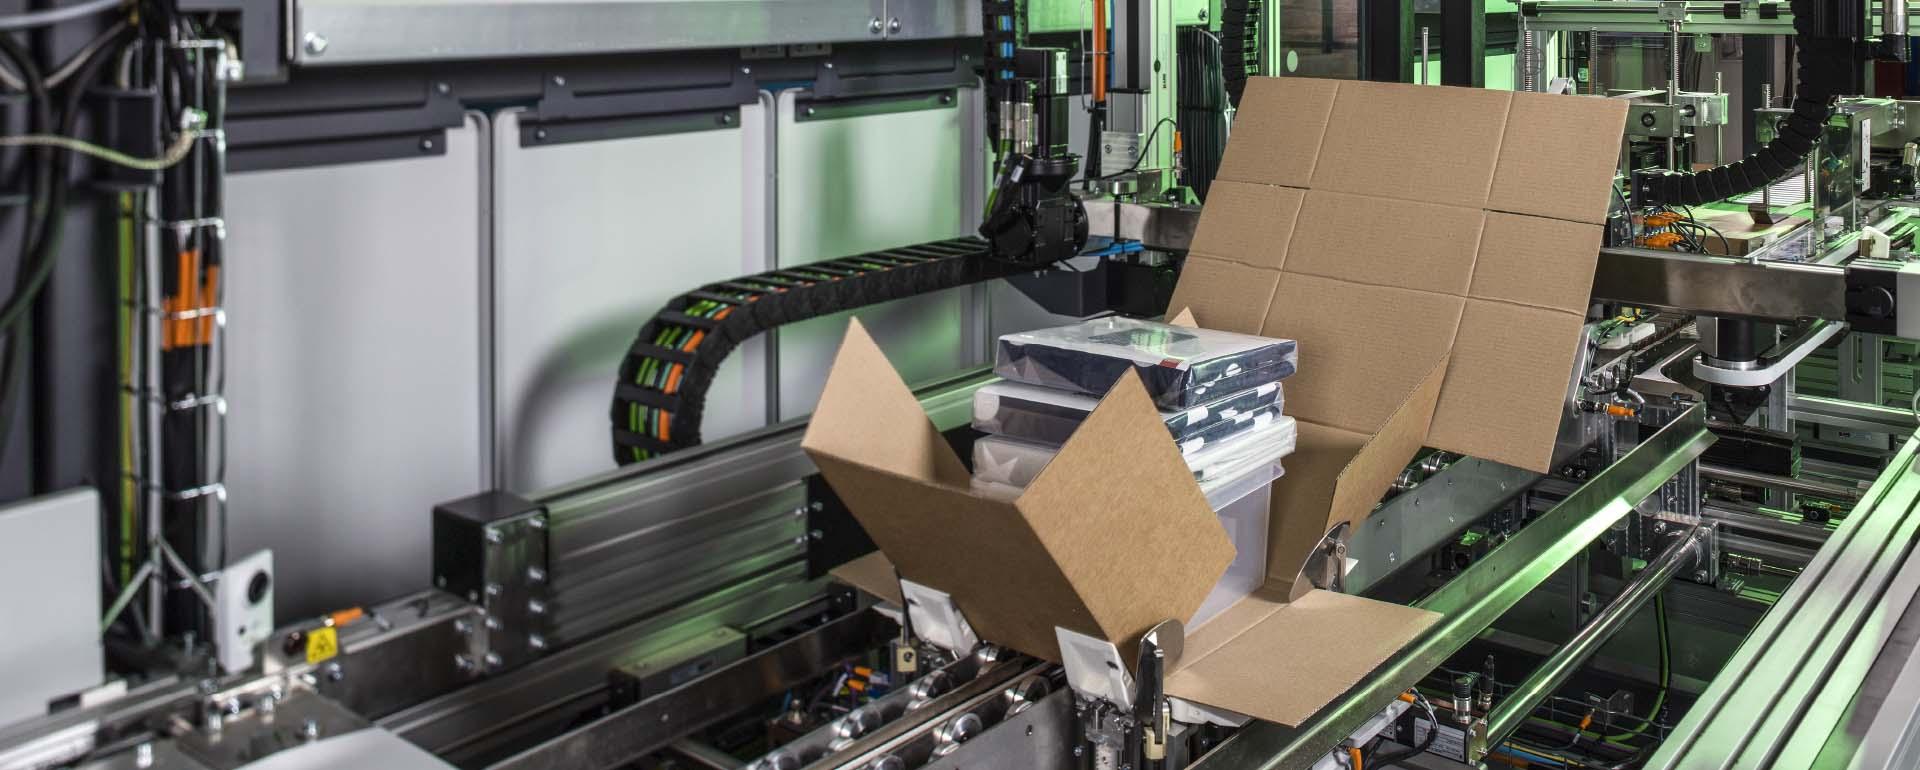 Product: CNB Computers optimizes all steps of packing fulfillment with the CVP